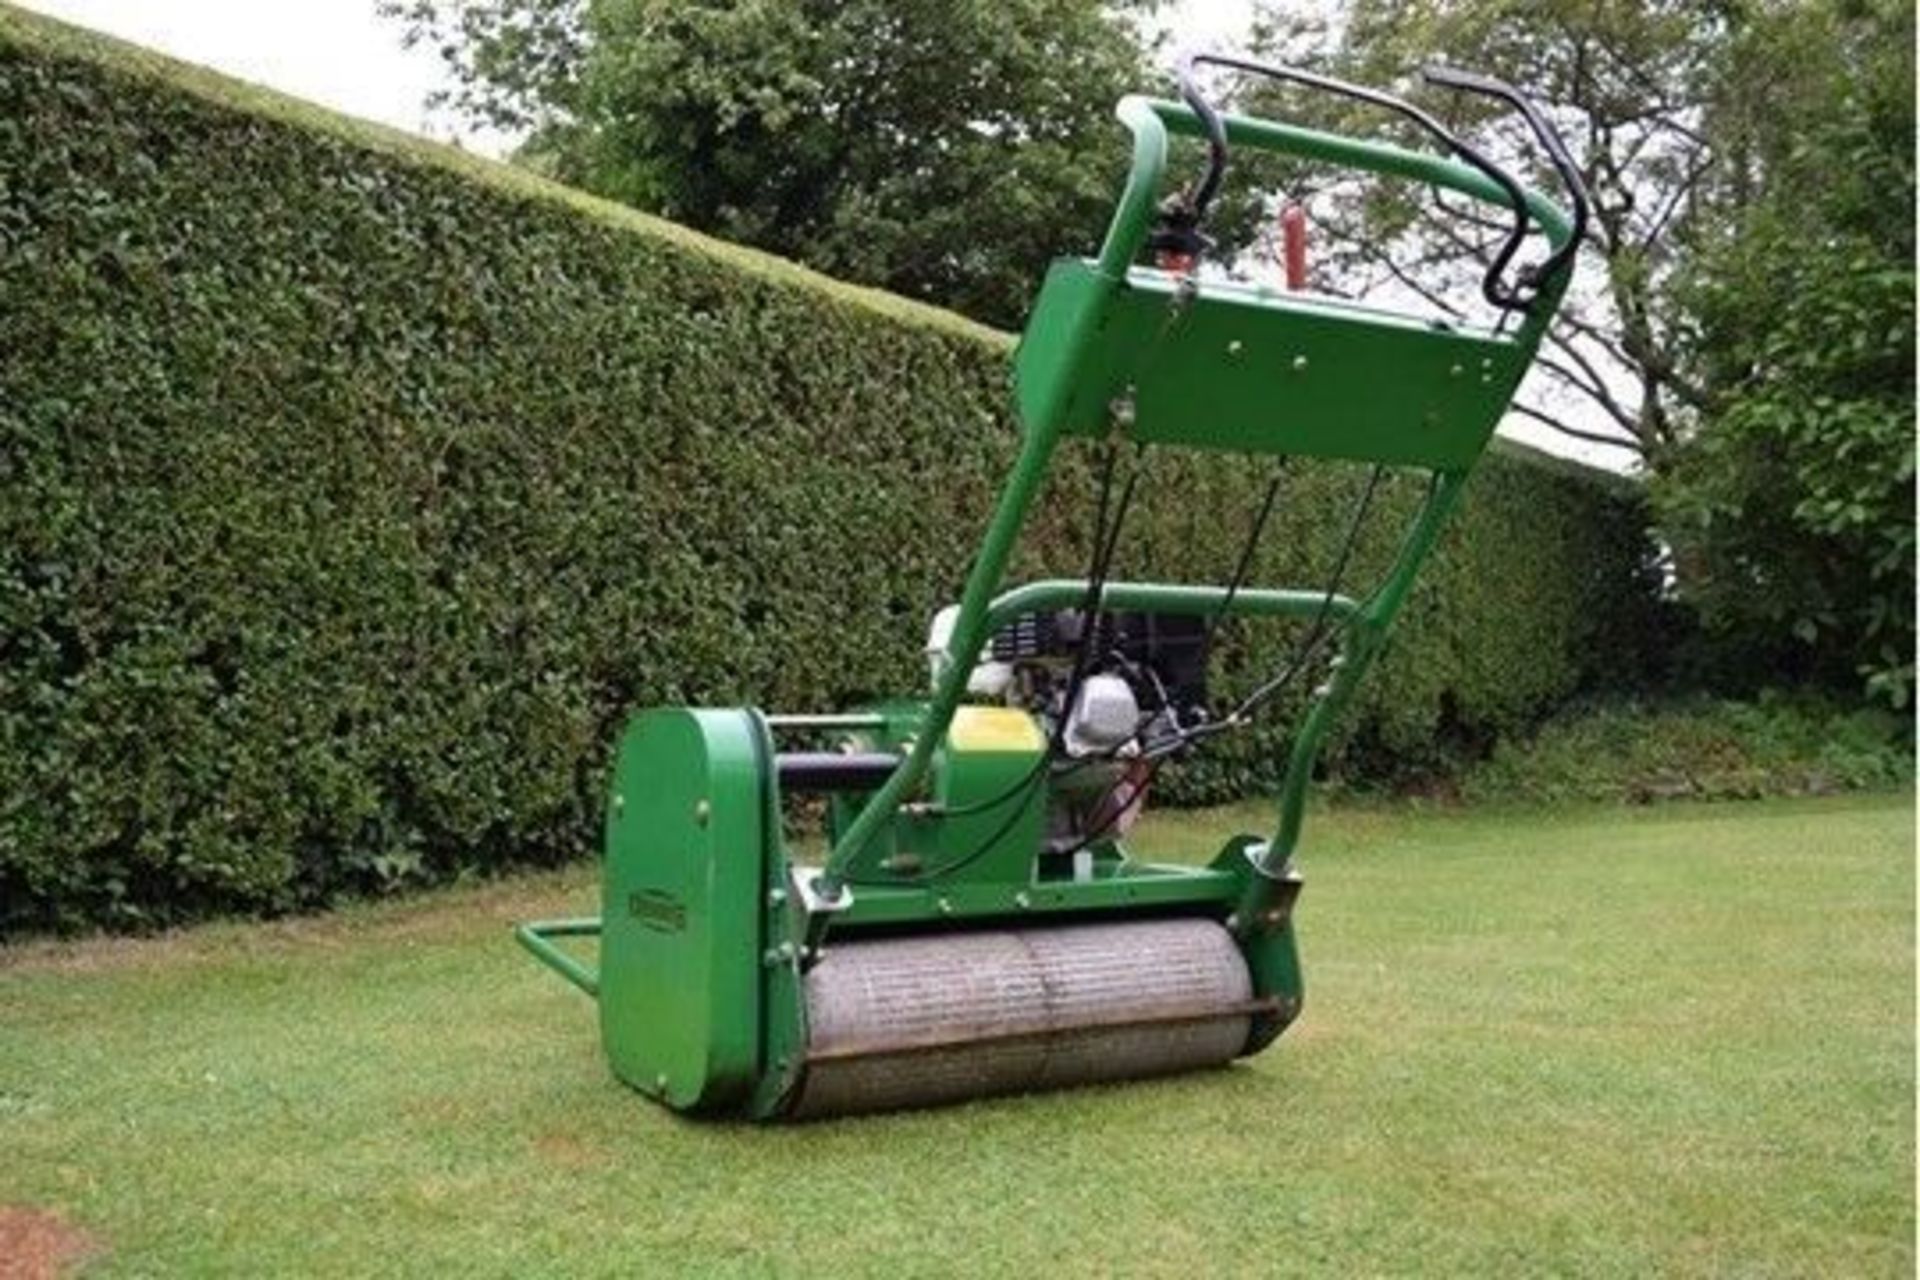 2004 Dennis G560 5 Blade Cylinder Mower With Grass Box - Image 6 of 11